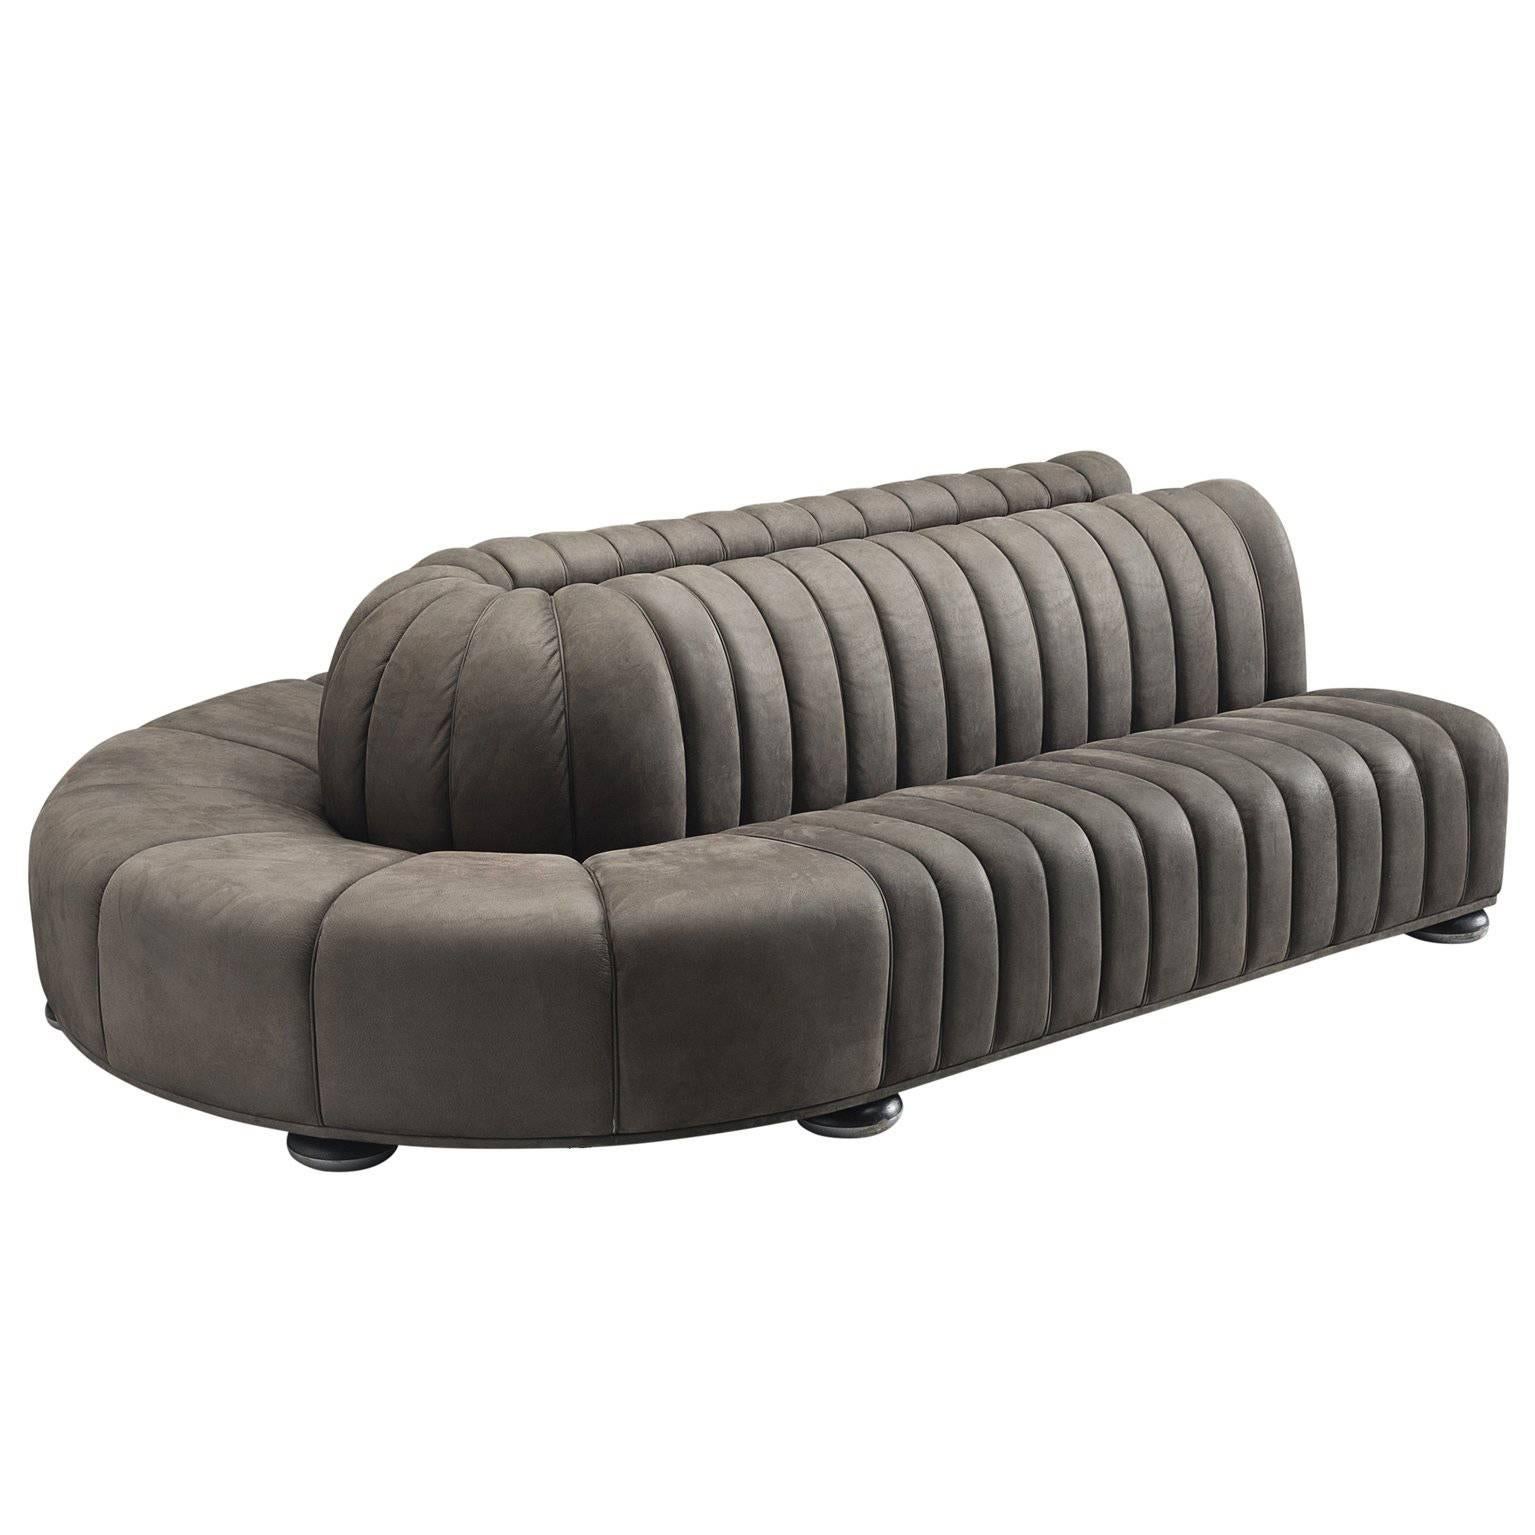 Custom-Made Luxurious Wittmann Sofa in Anthracite Leather